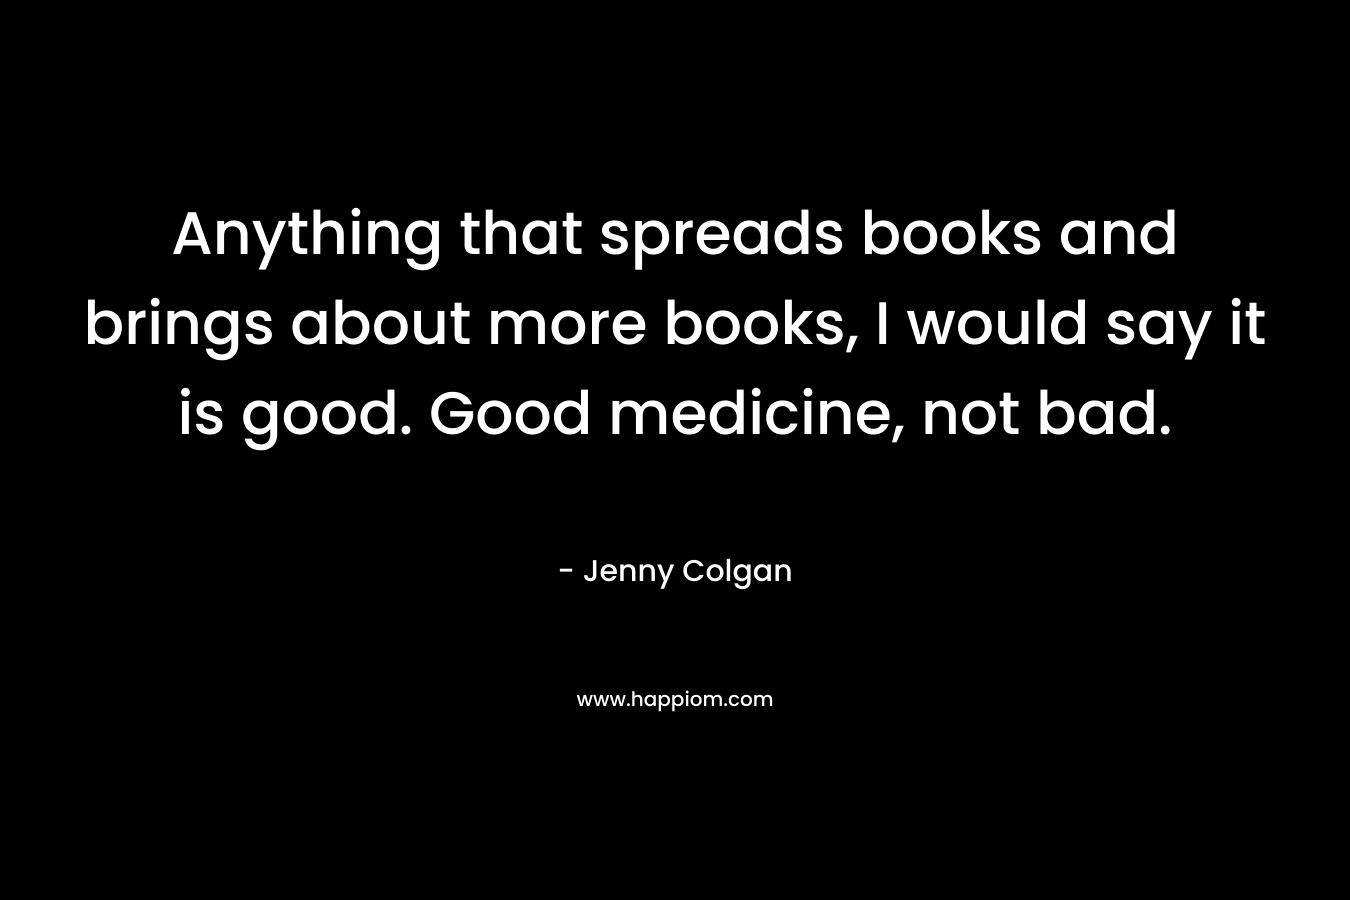 Anything that spreads books and brings about more books, I would say it is good. Good medicine, not bad. – Jenny Colgan